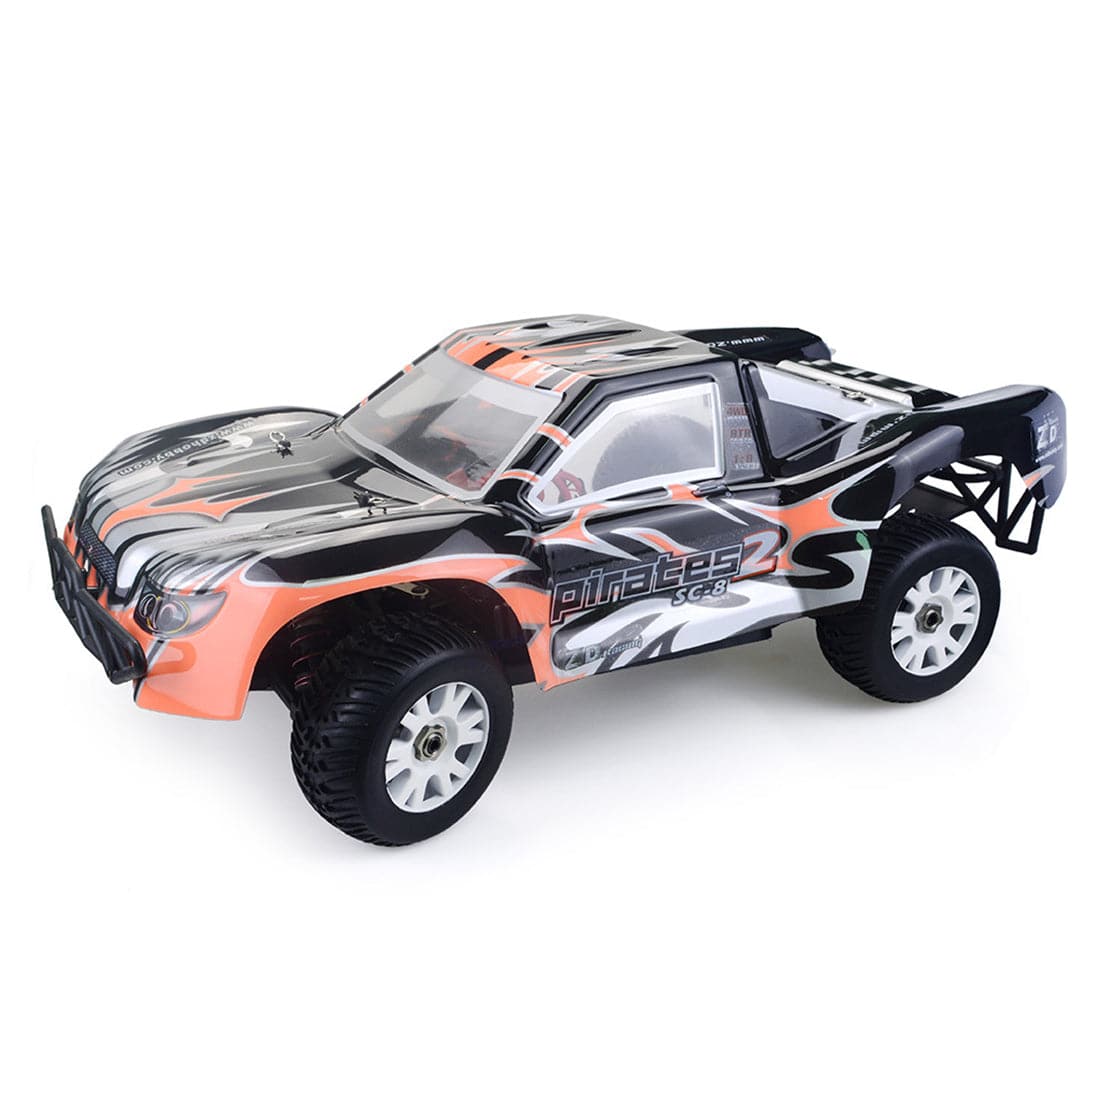 ZD Racing 9203 1/8 4WD 90KM/H RC Brushless Electric Vehicle Short Course  Truck - RTR Version - Black